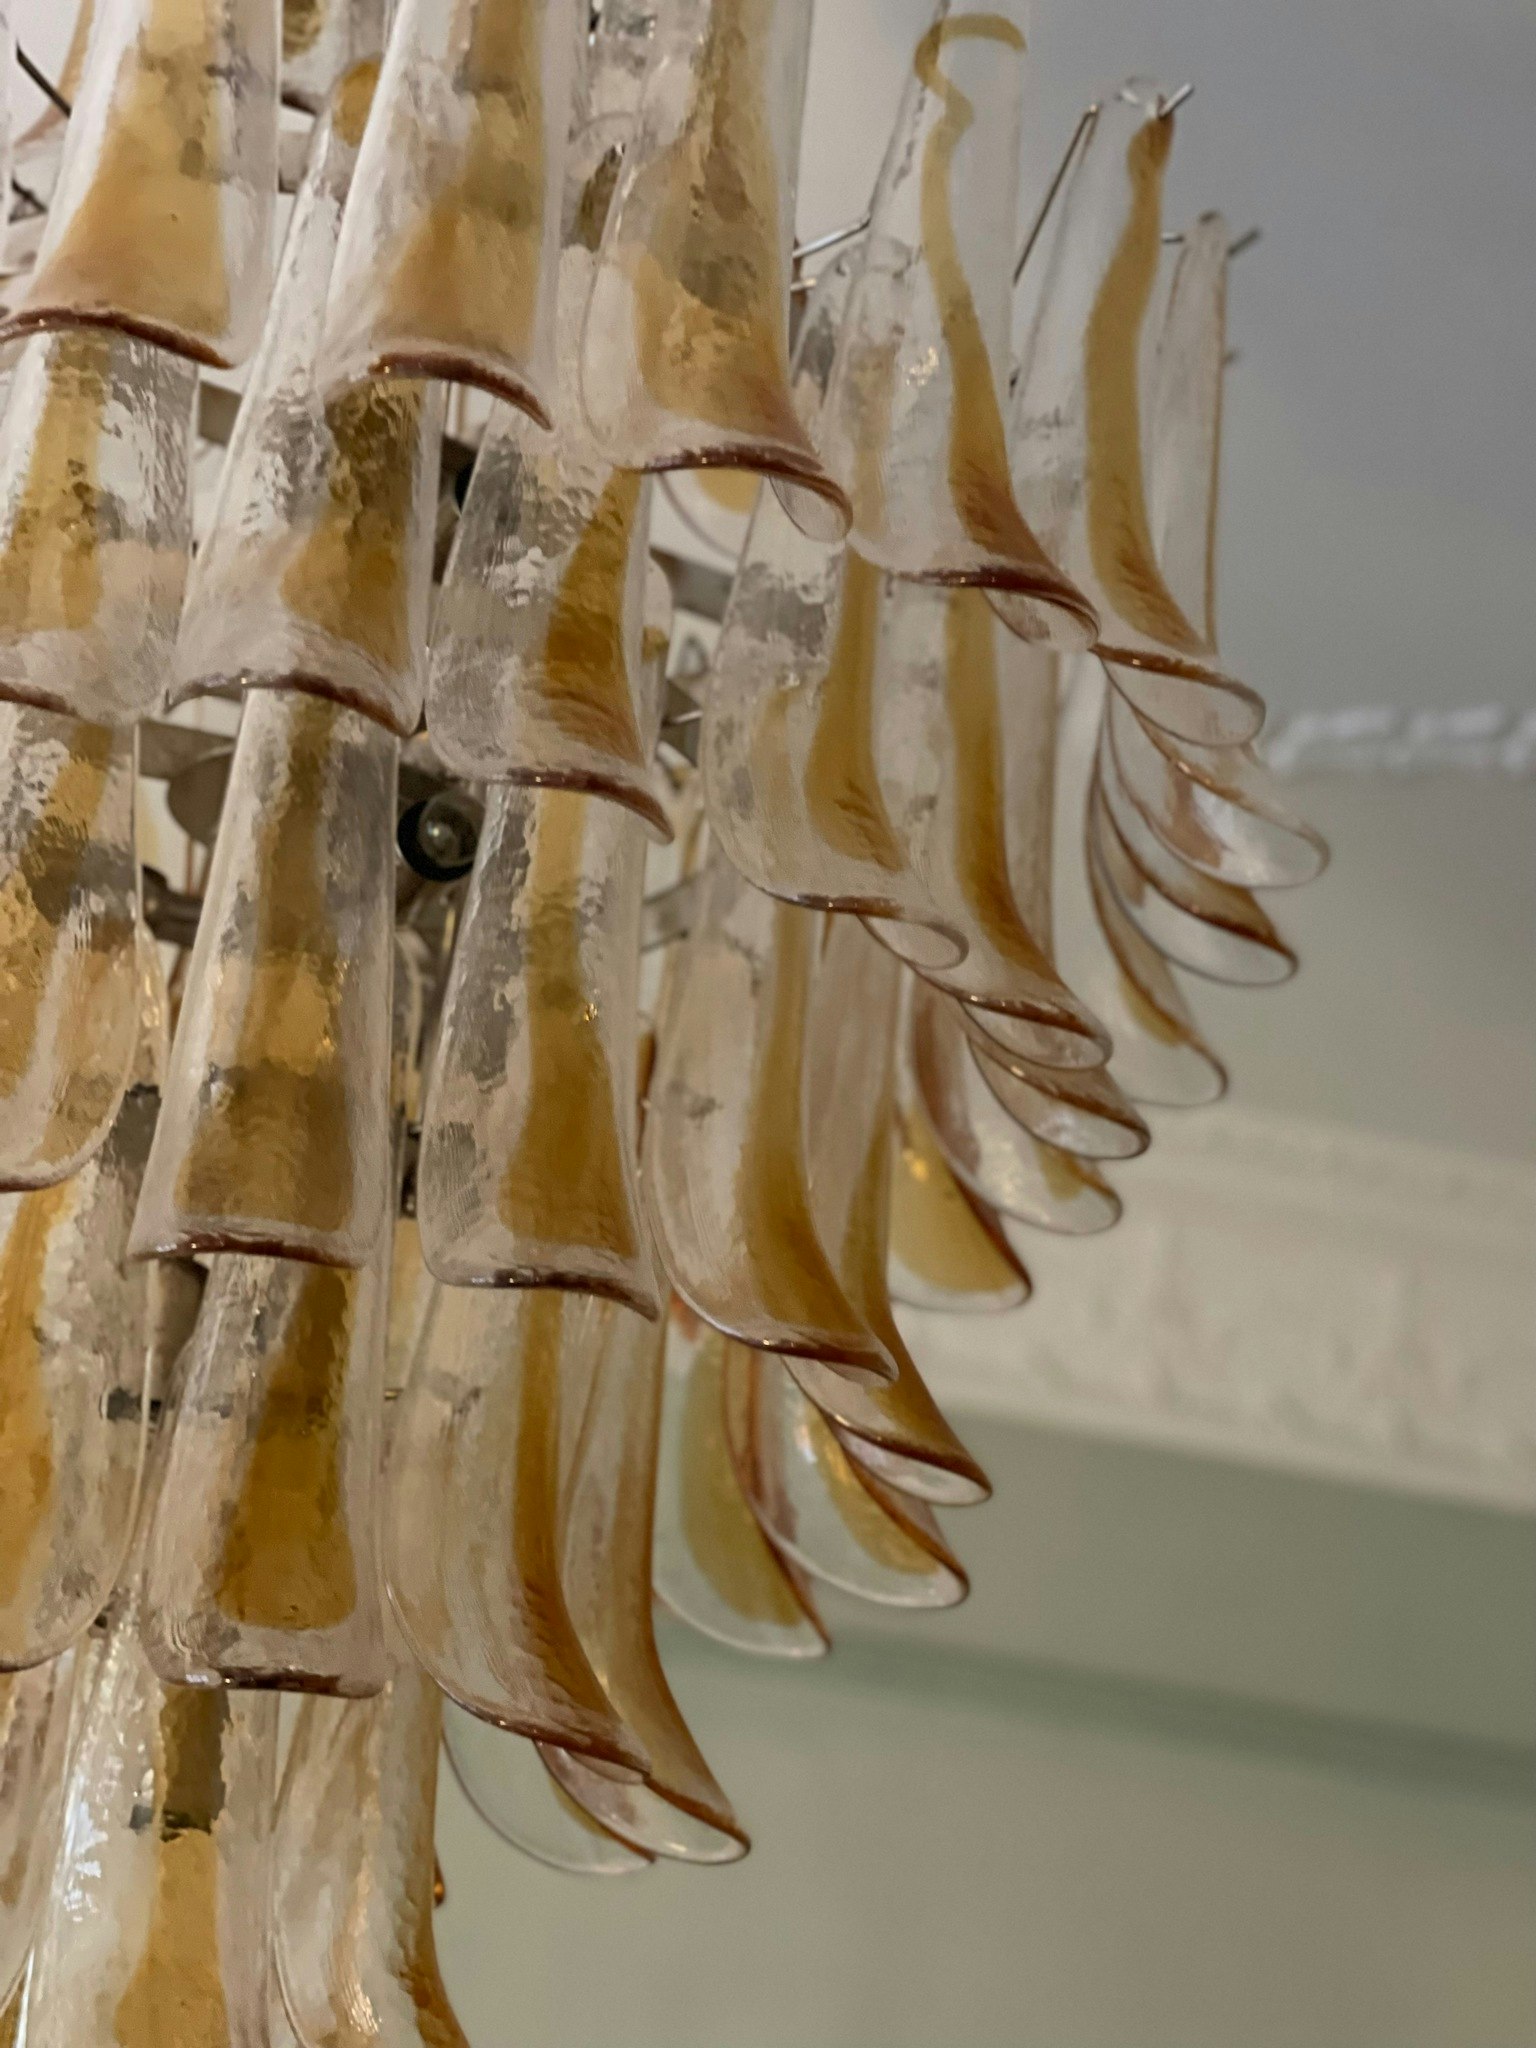 Sand Colored Murano Chandelier - Mazzega Style - GIANT